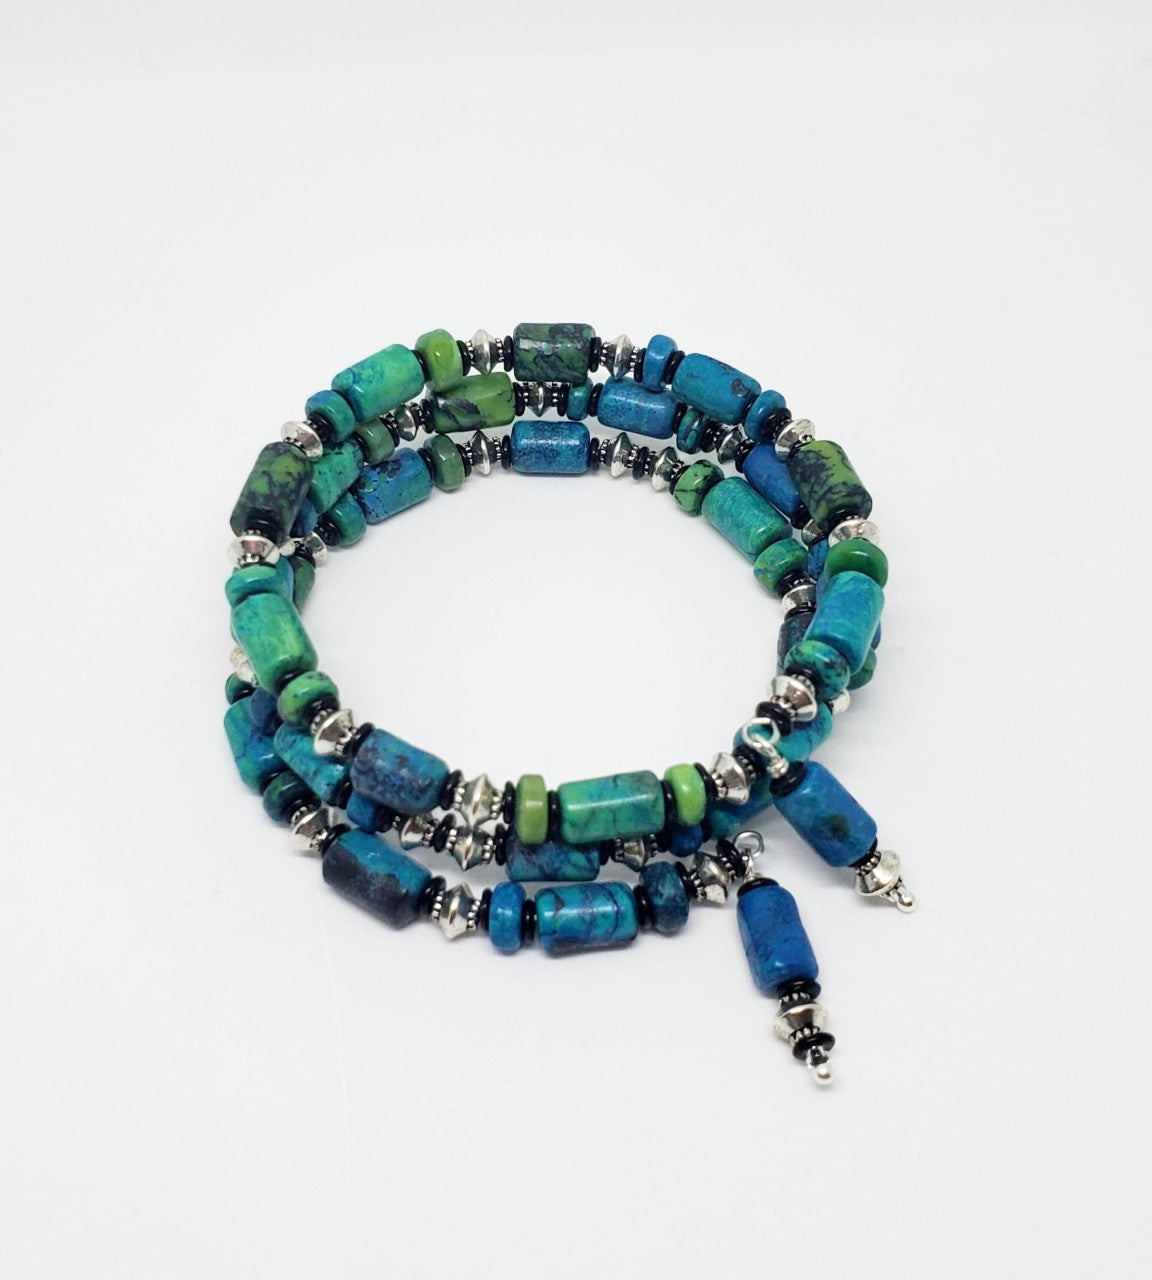 The Ethical Beauty of Layered Charm's Semi-Precious Stretch Bead Brace